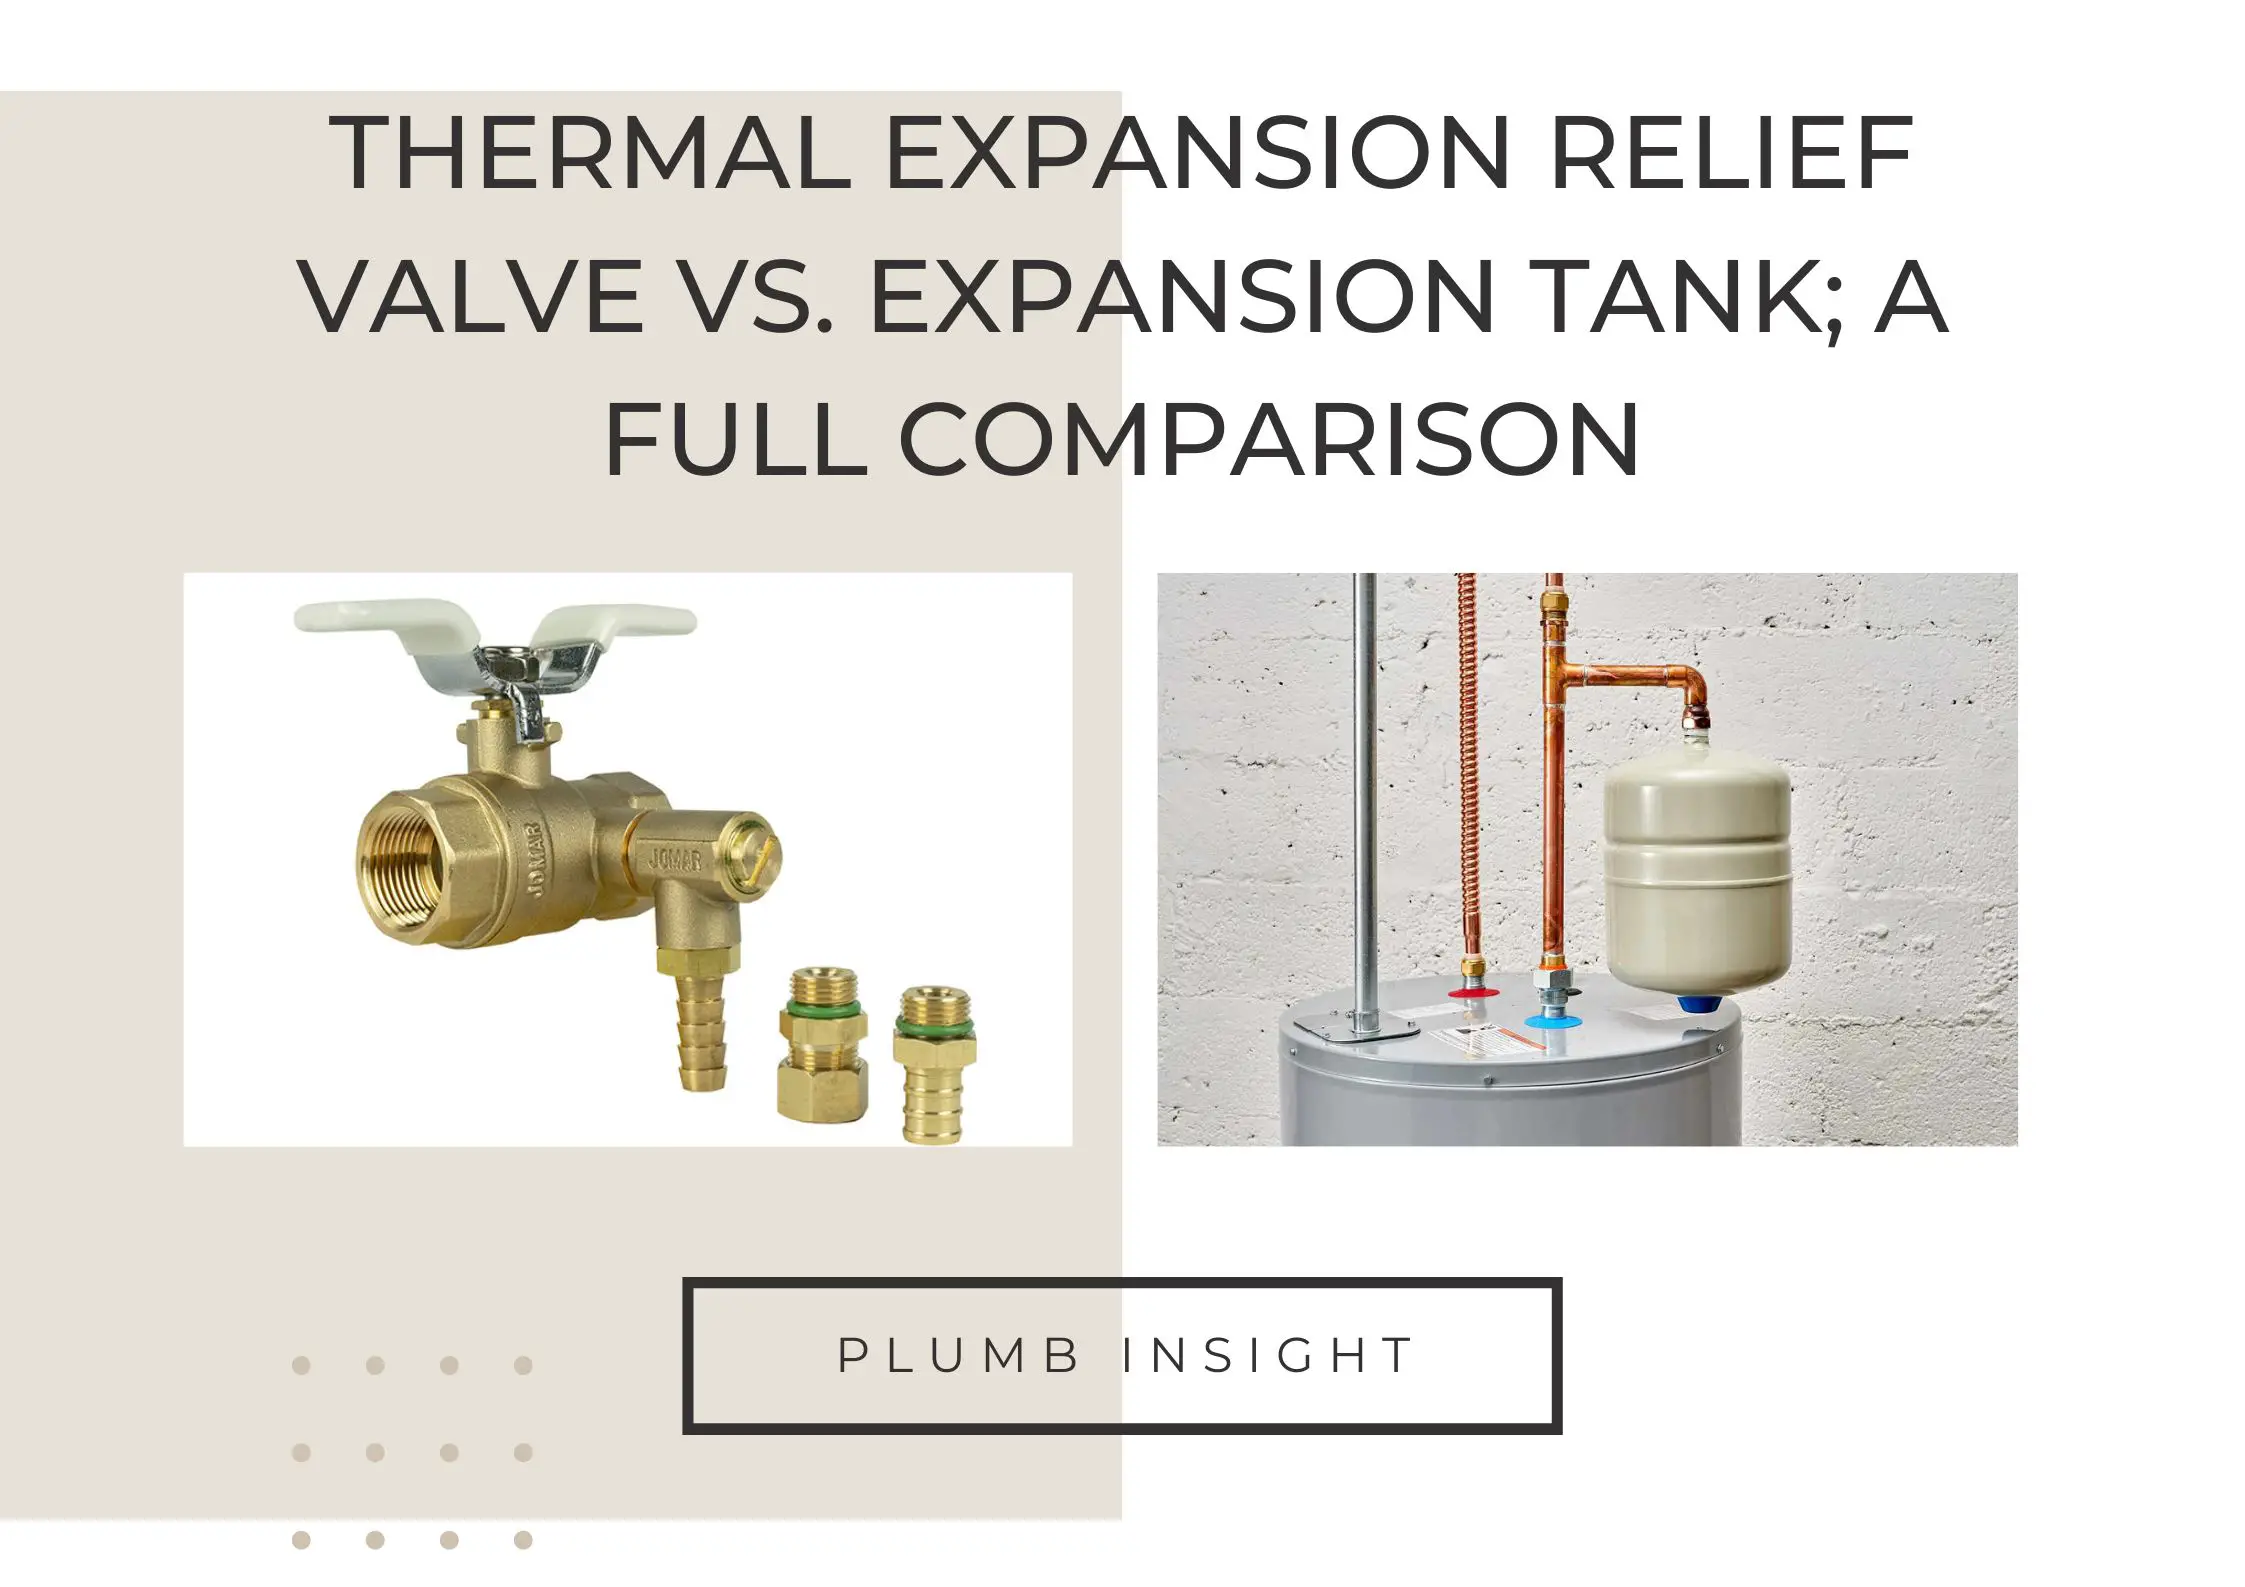 Thermal Expansion Relief Valve Vs. Expansion Tank